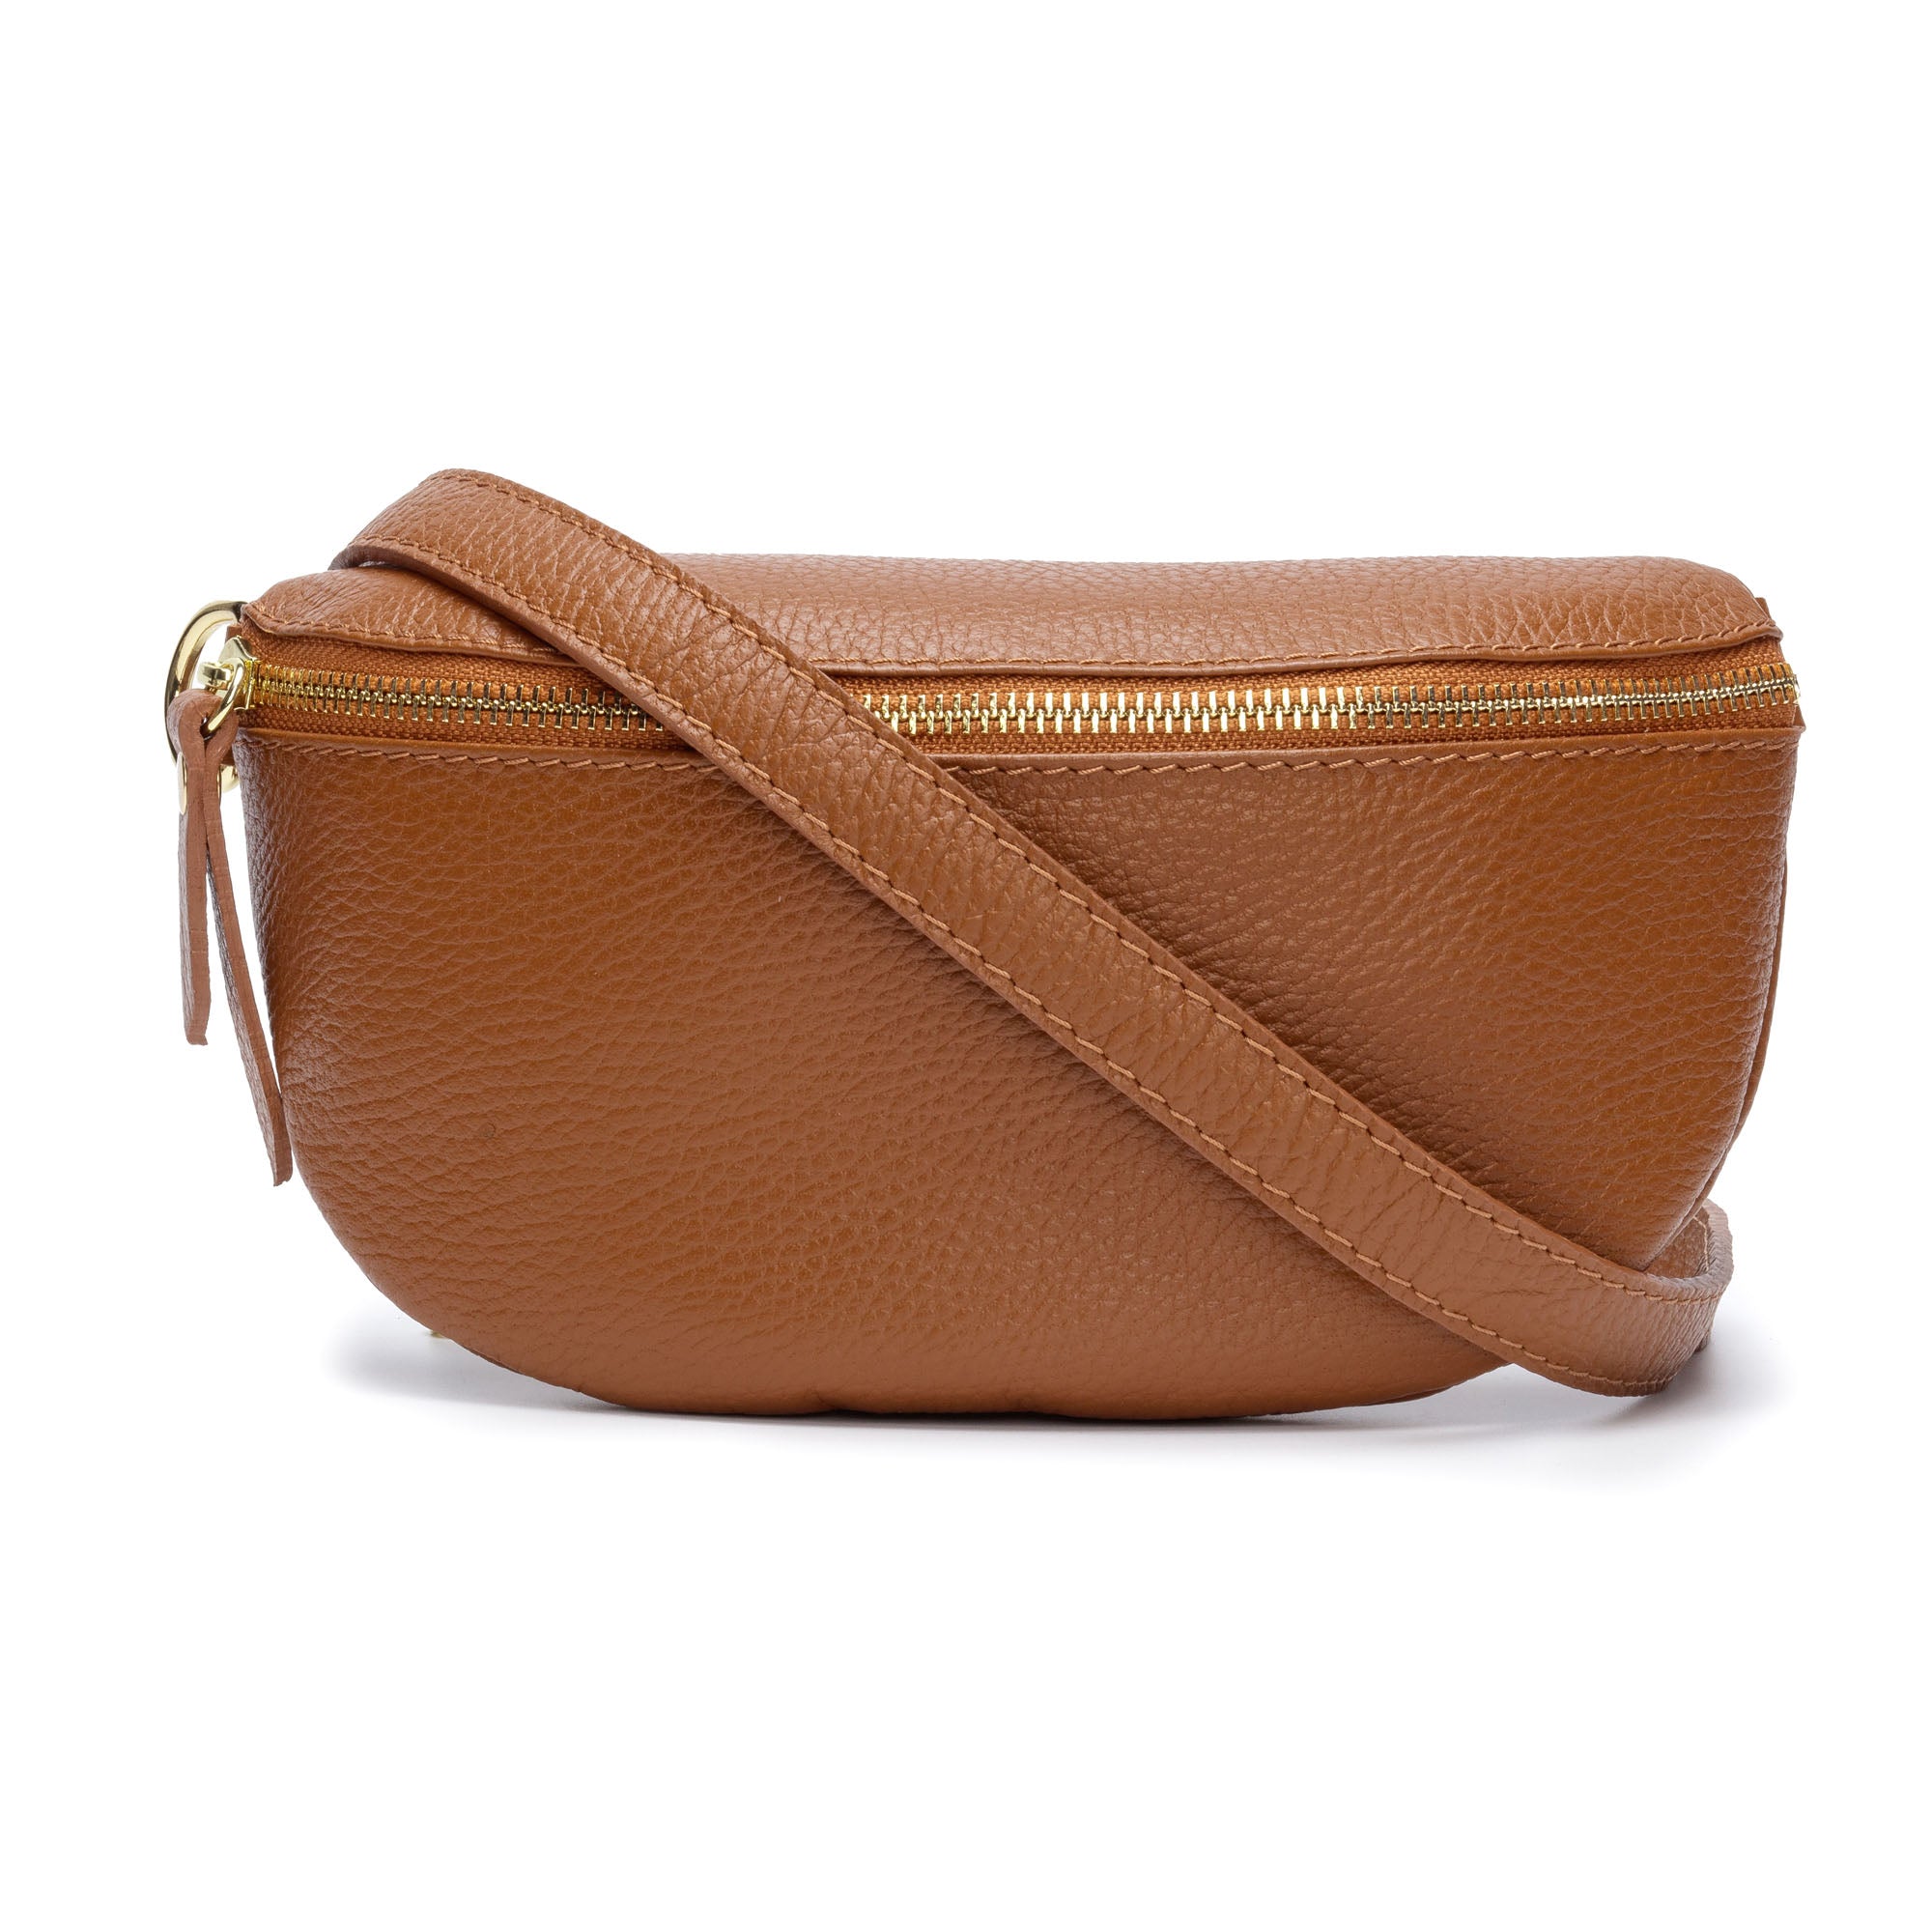 Sling Bag - Tan with Leopard Strap